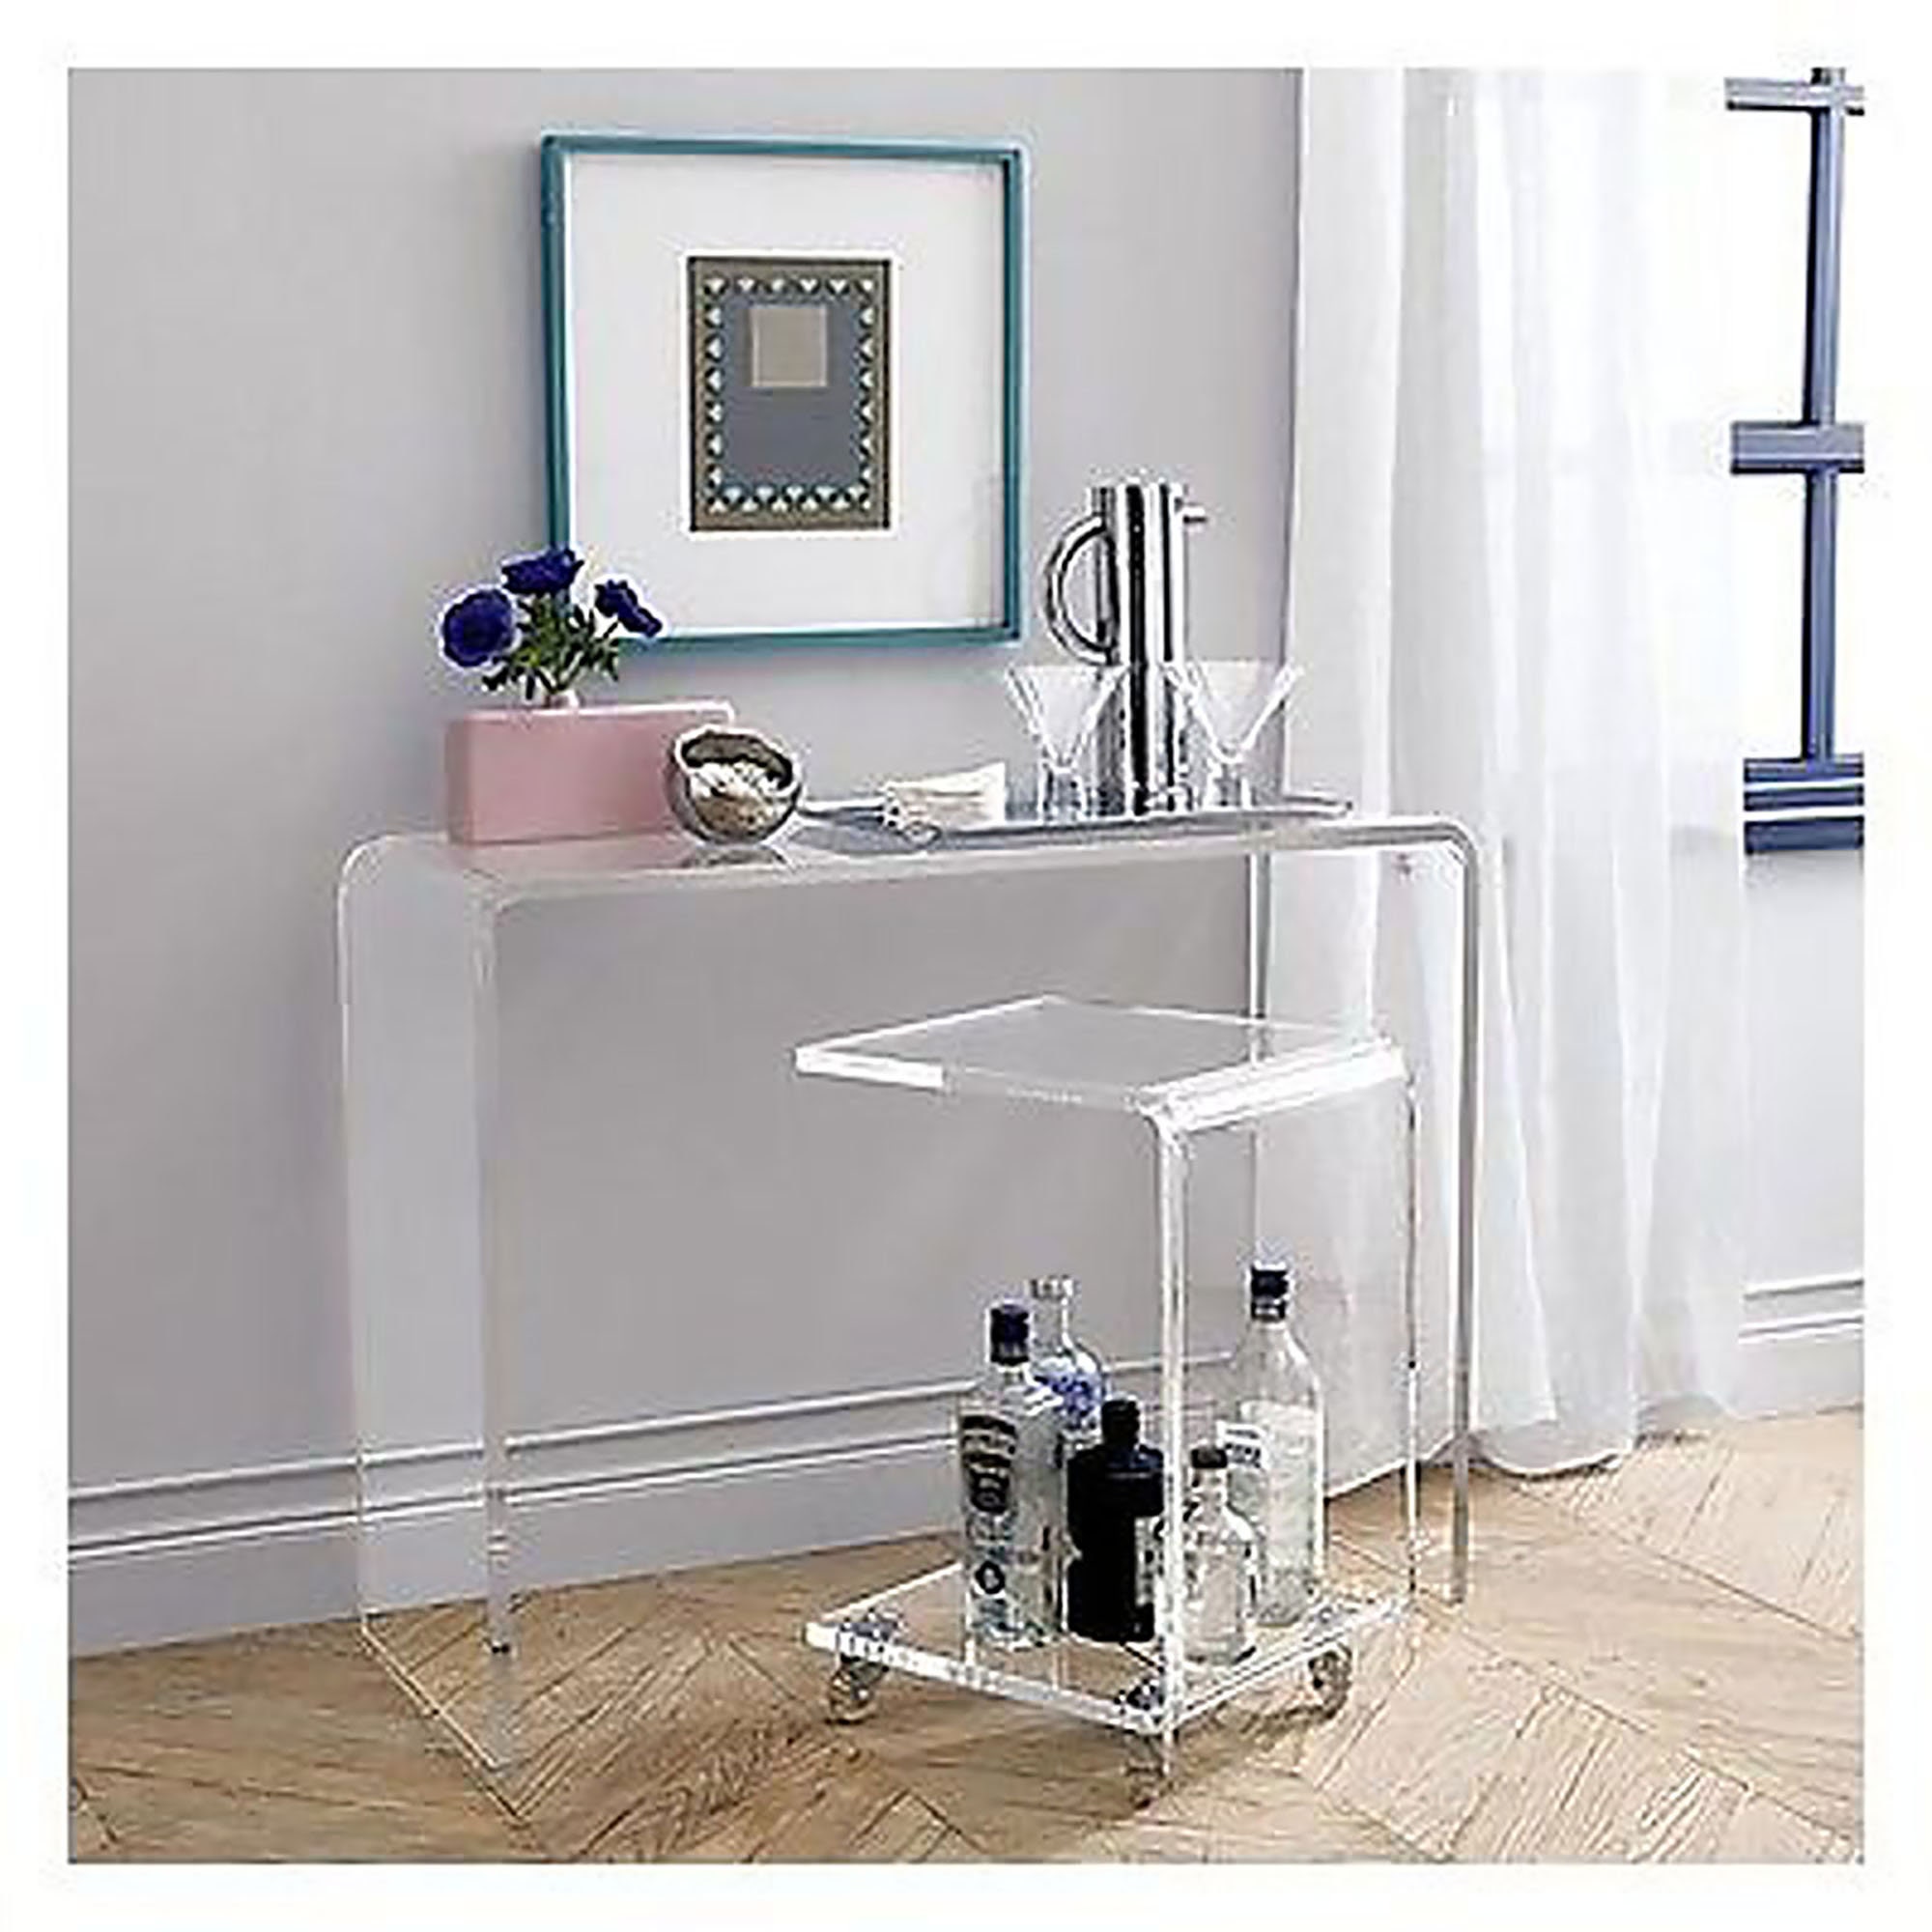 Acrylic Console Table Waterfall Style 46 X 12 X - Etsy